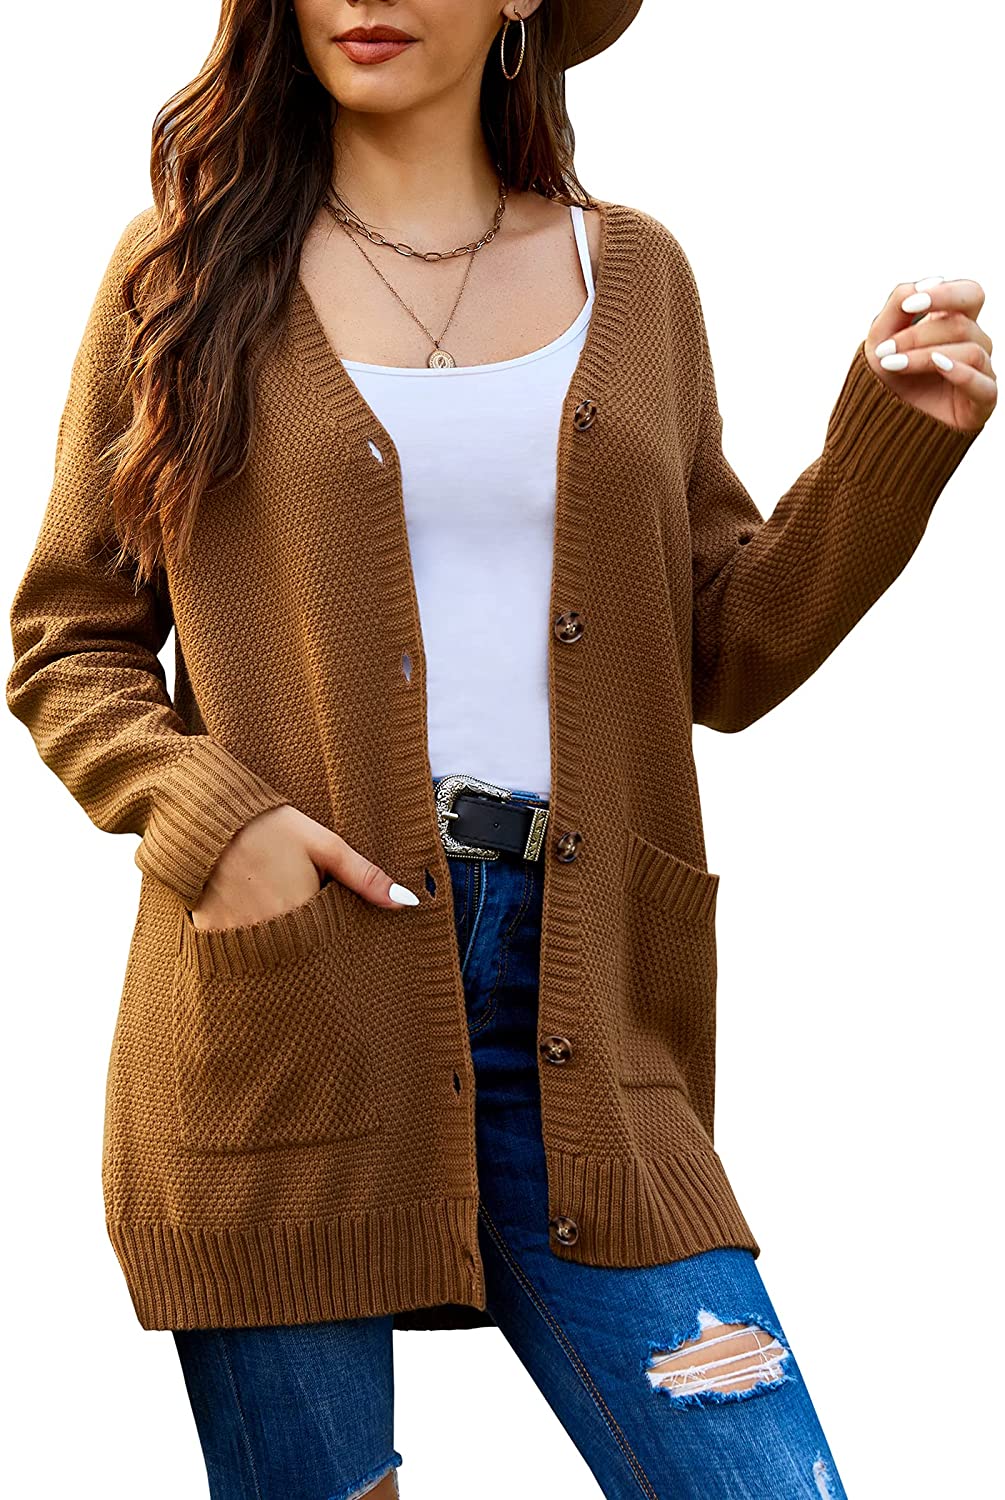 Hotouch Womens Chunky Cardigan Long Sleeves Button V Neck Pockets Cable Knit Casual Sweater